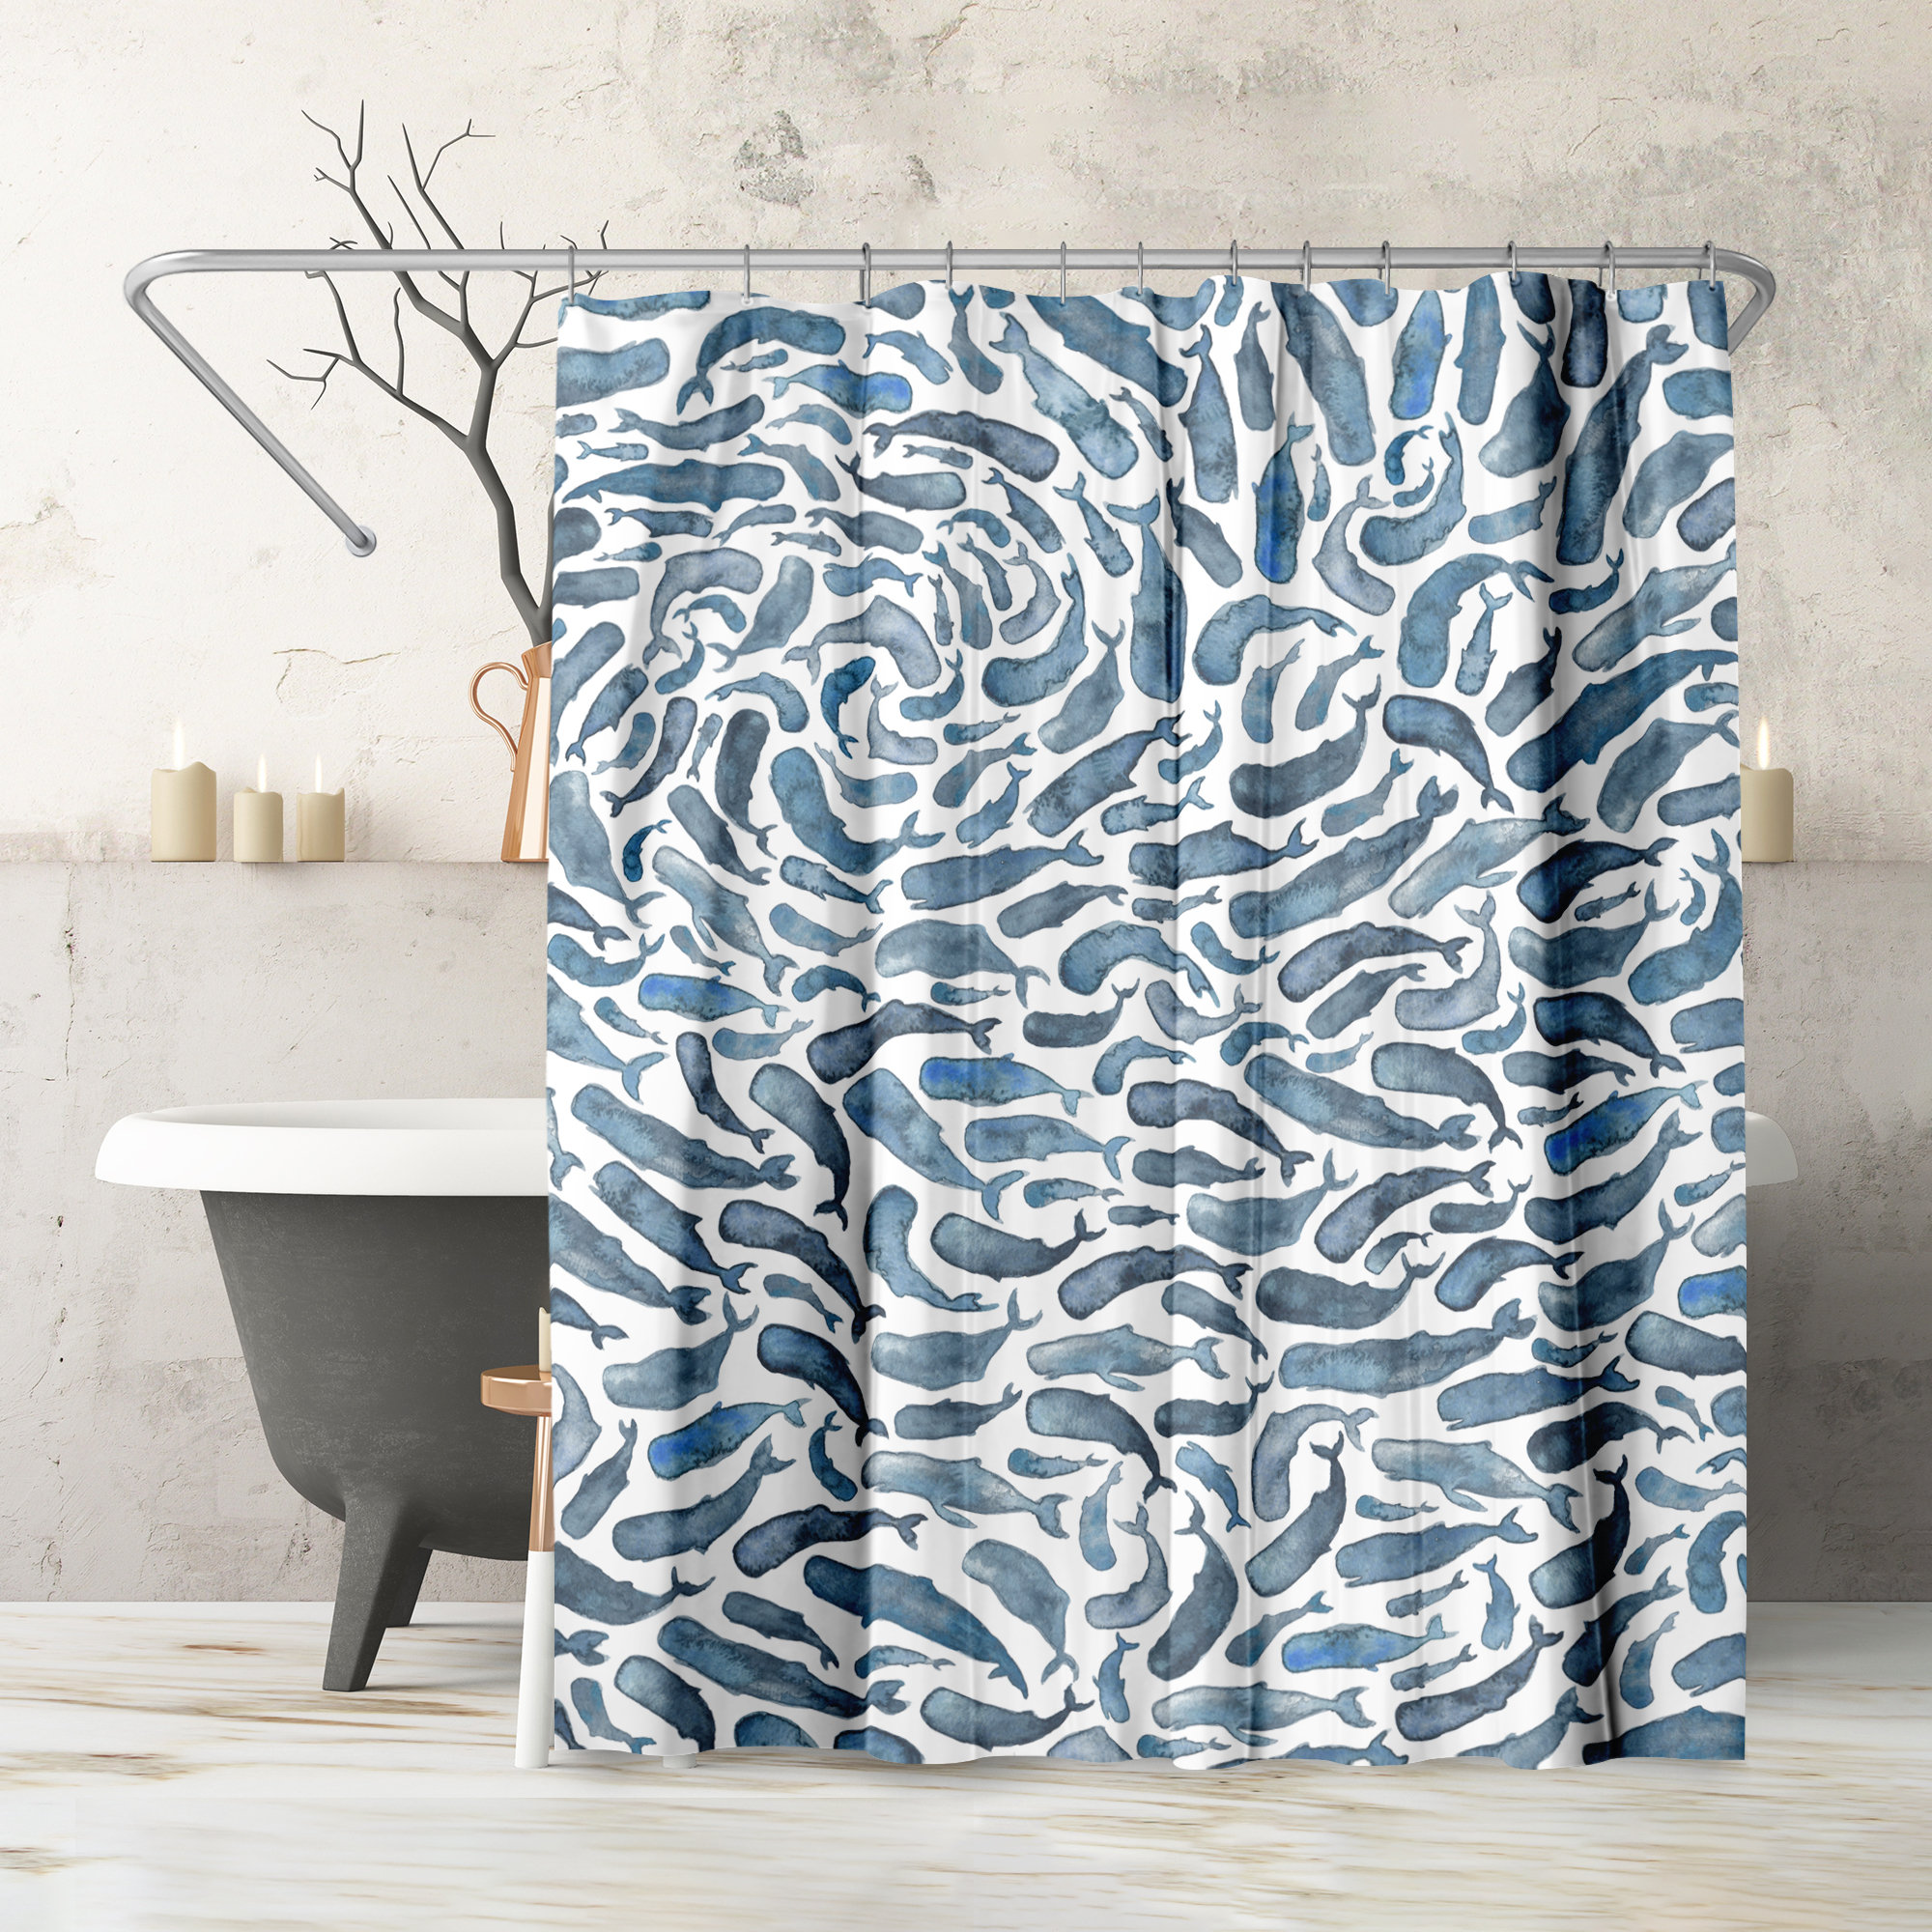 Shower Curtain Shark, Funny Ocean-themed Shower Curtain Set With 12 Hooks,  Cool Waterproof And Mold-proof Bathroom Curtains